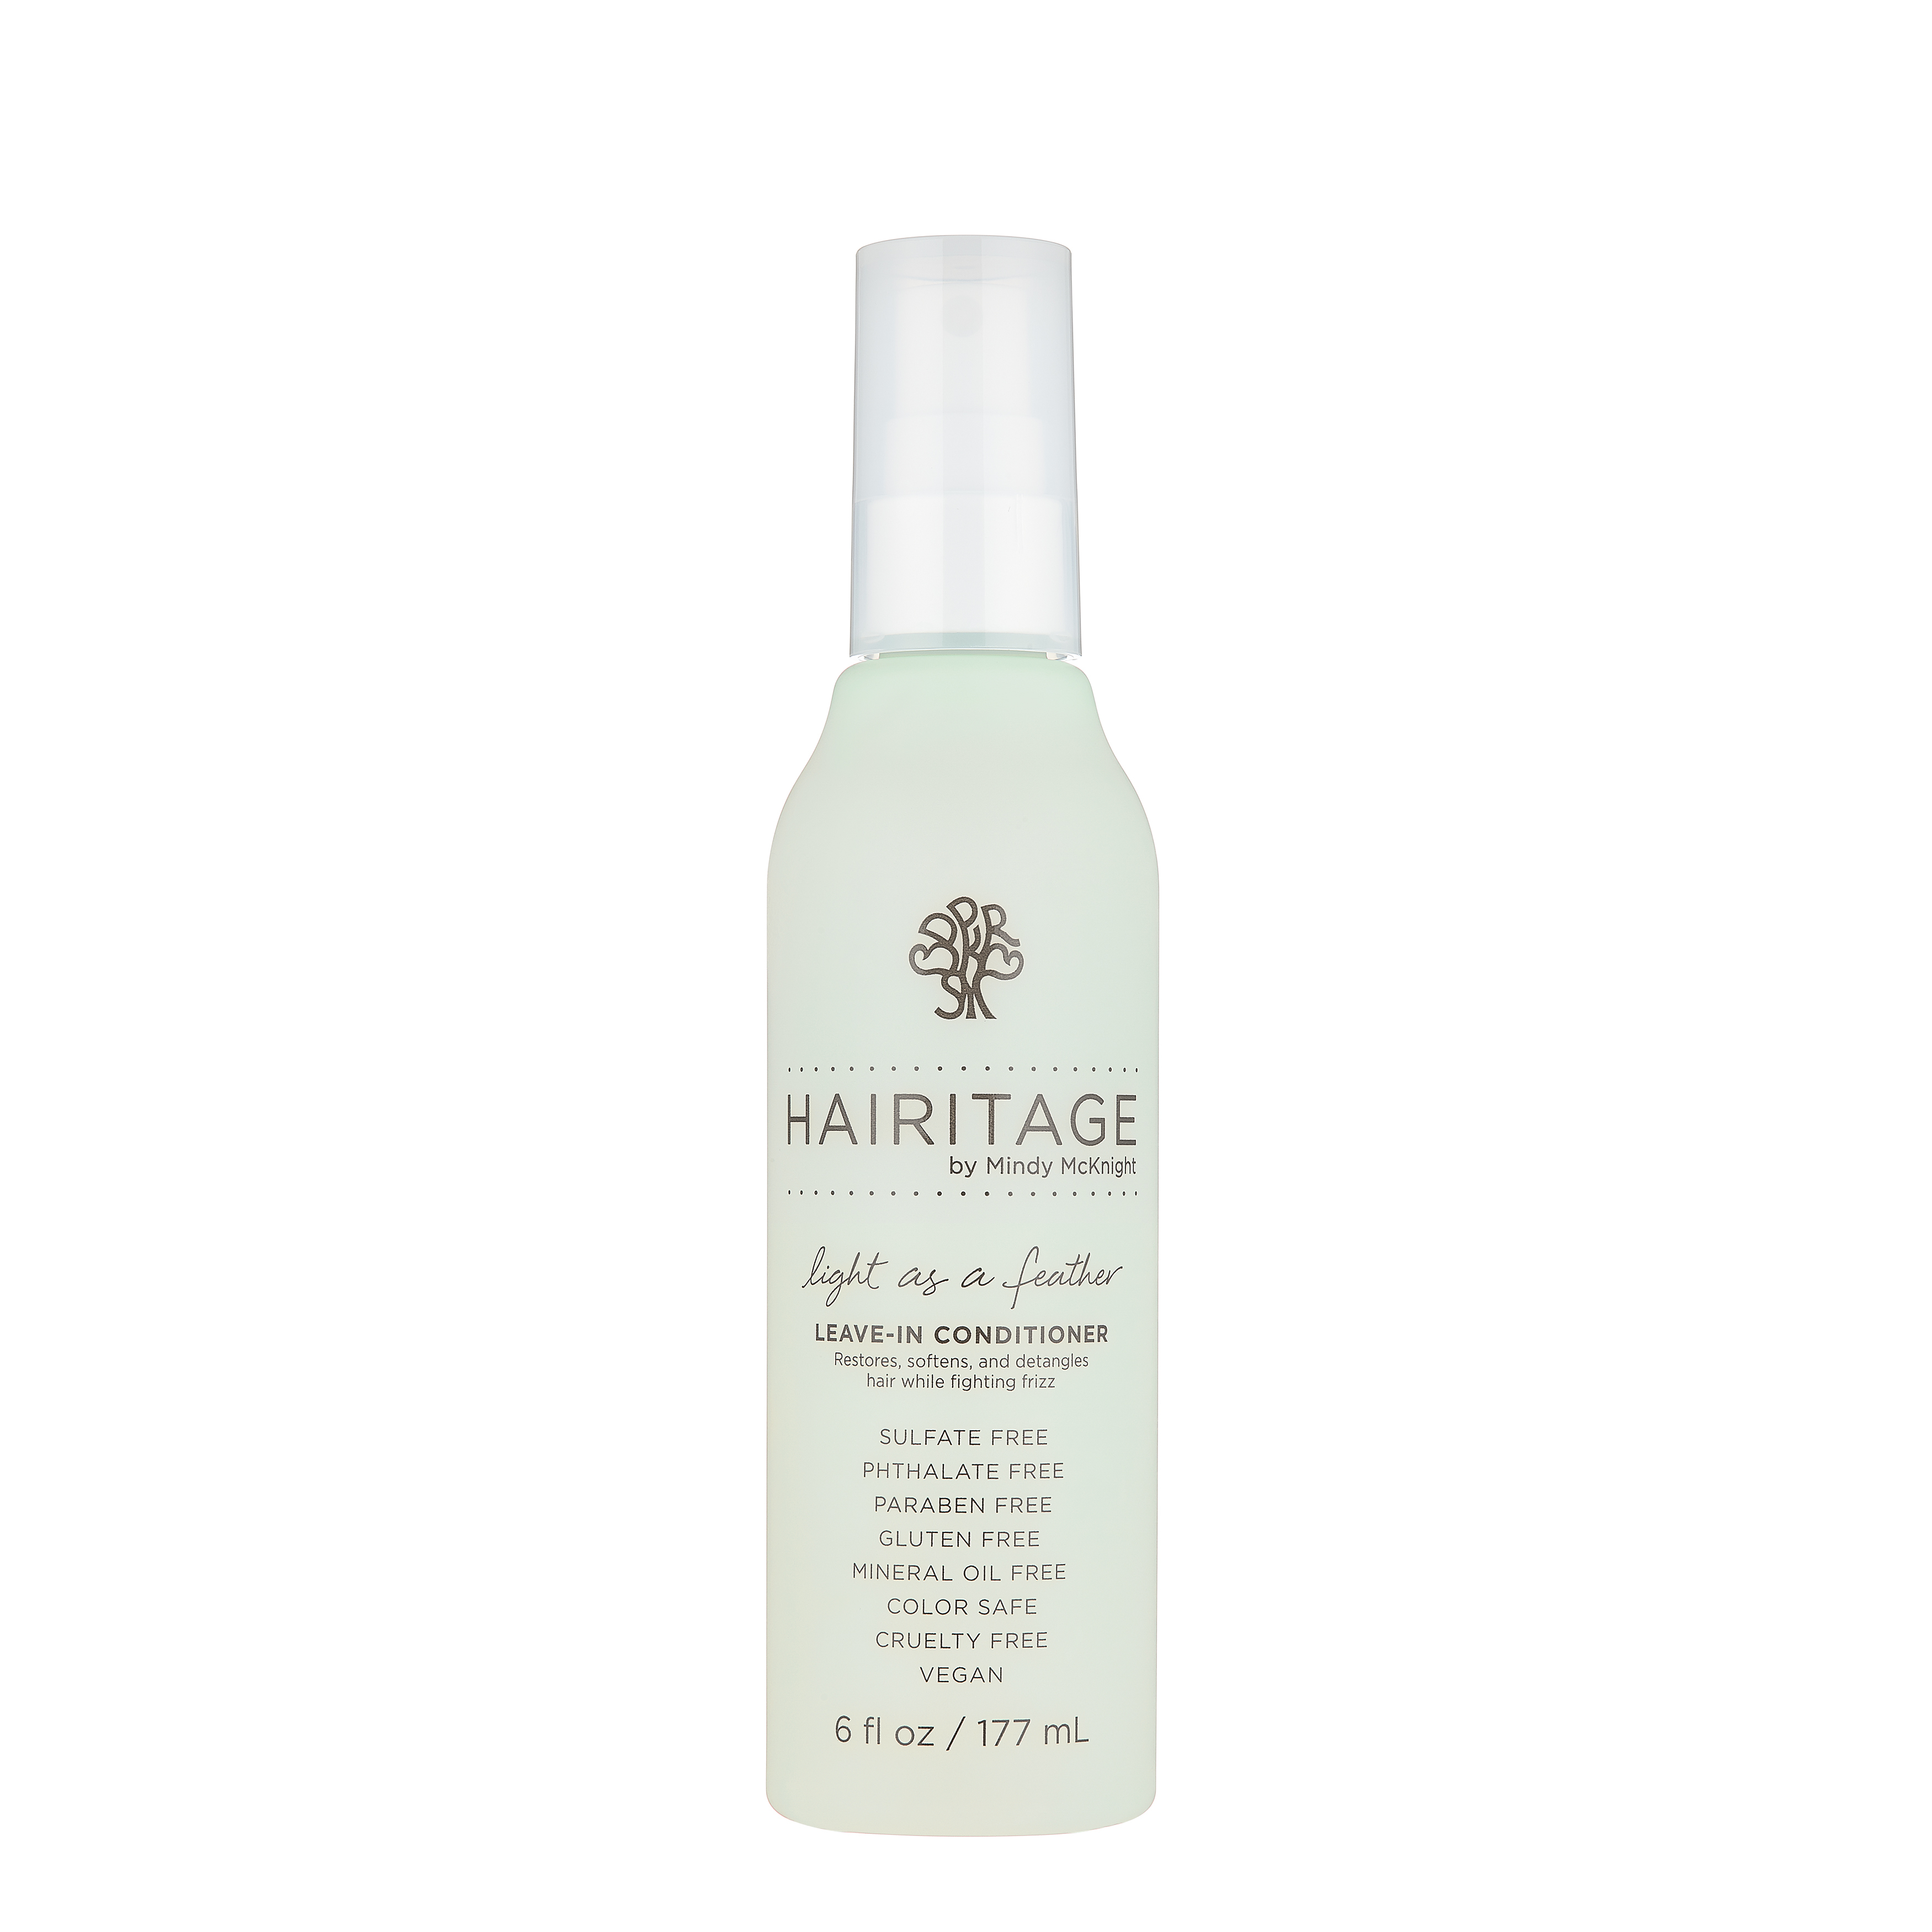 Hairitage Light as a Feather Detangling Leave-in Conditioner Spray, 6 fl oz - image 3 of 8